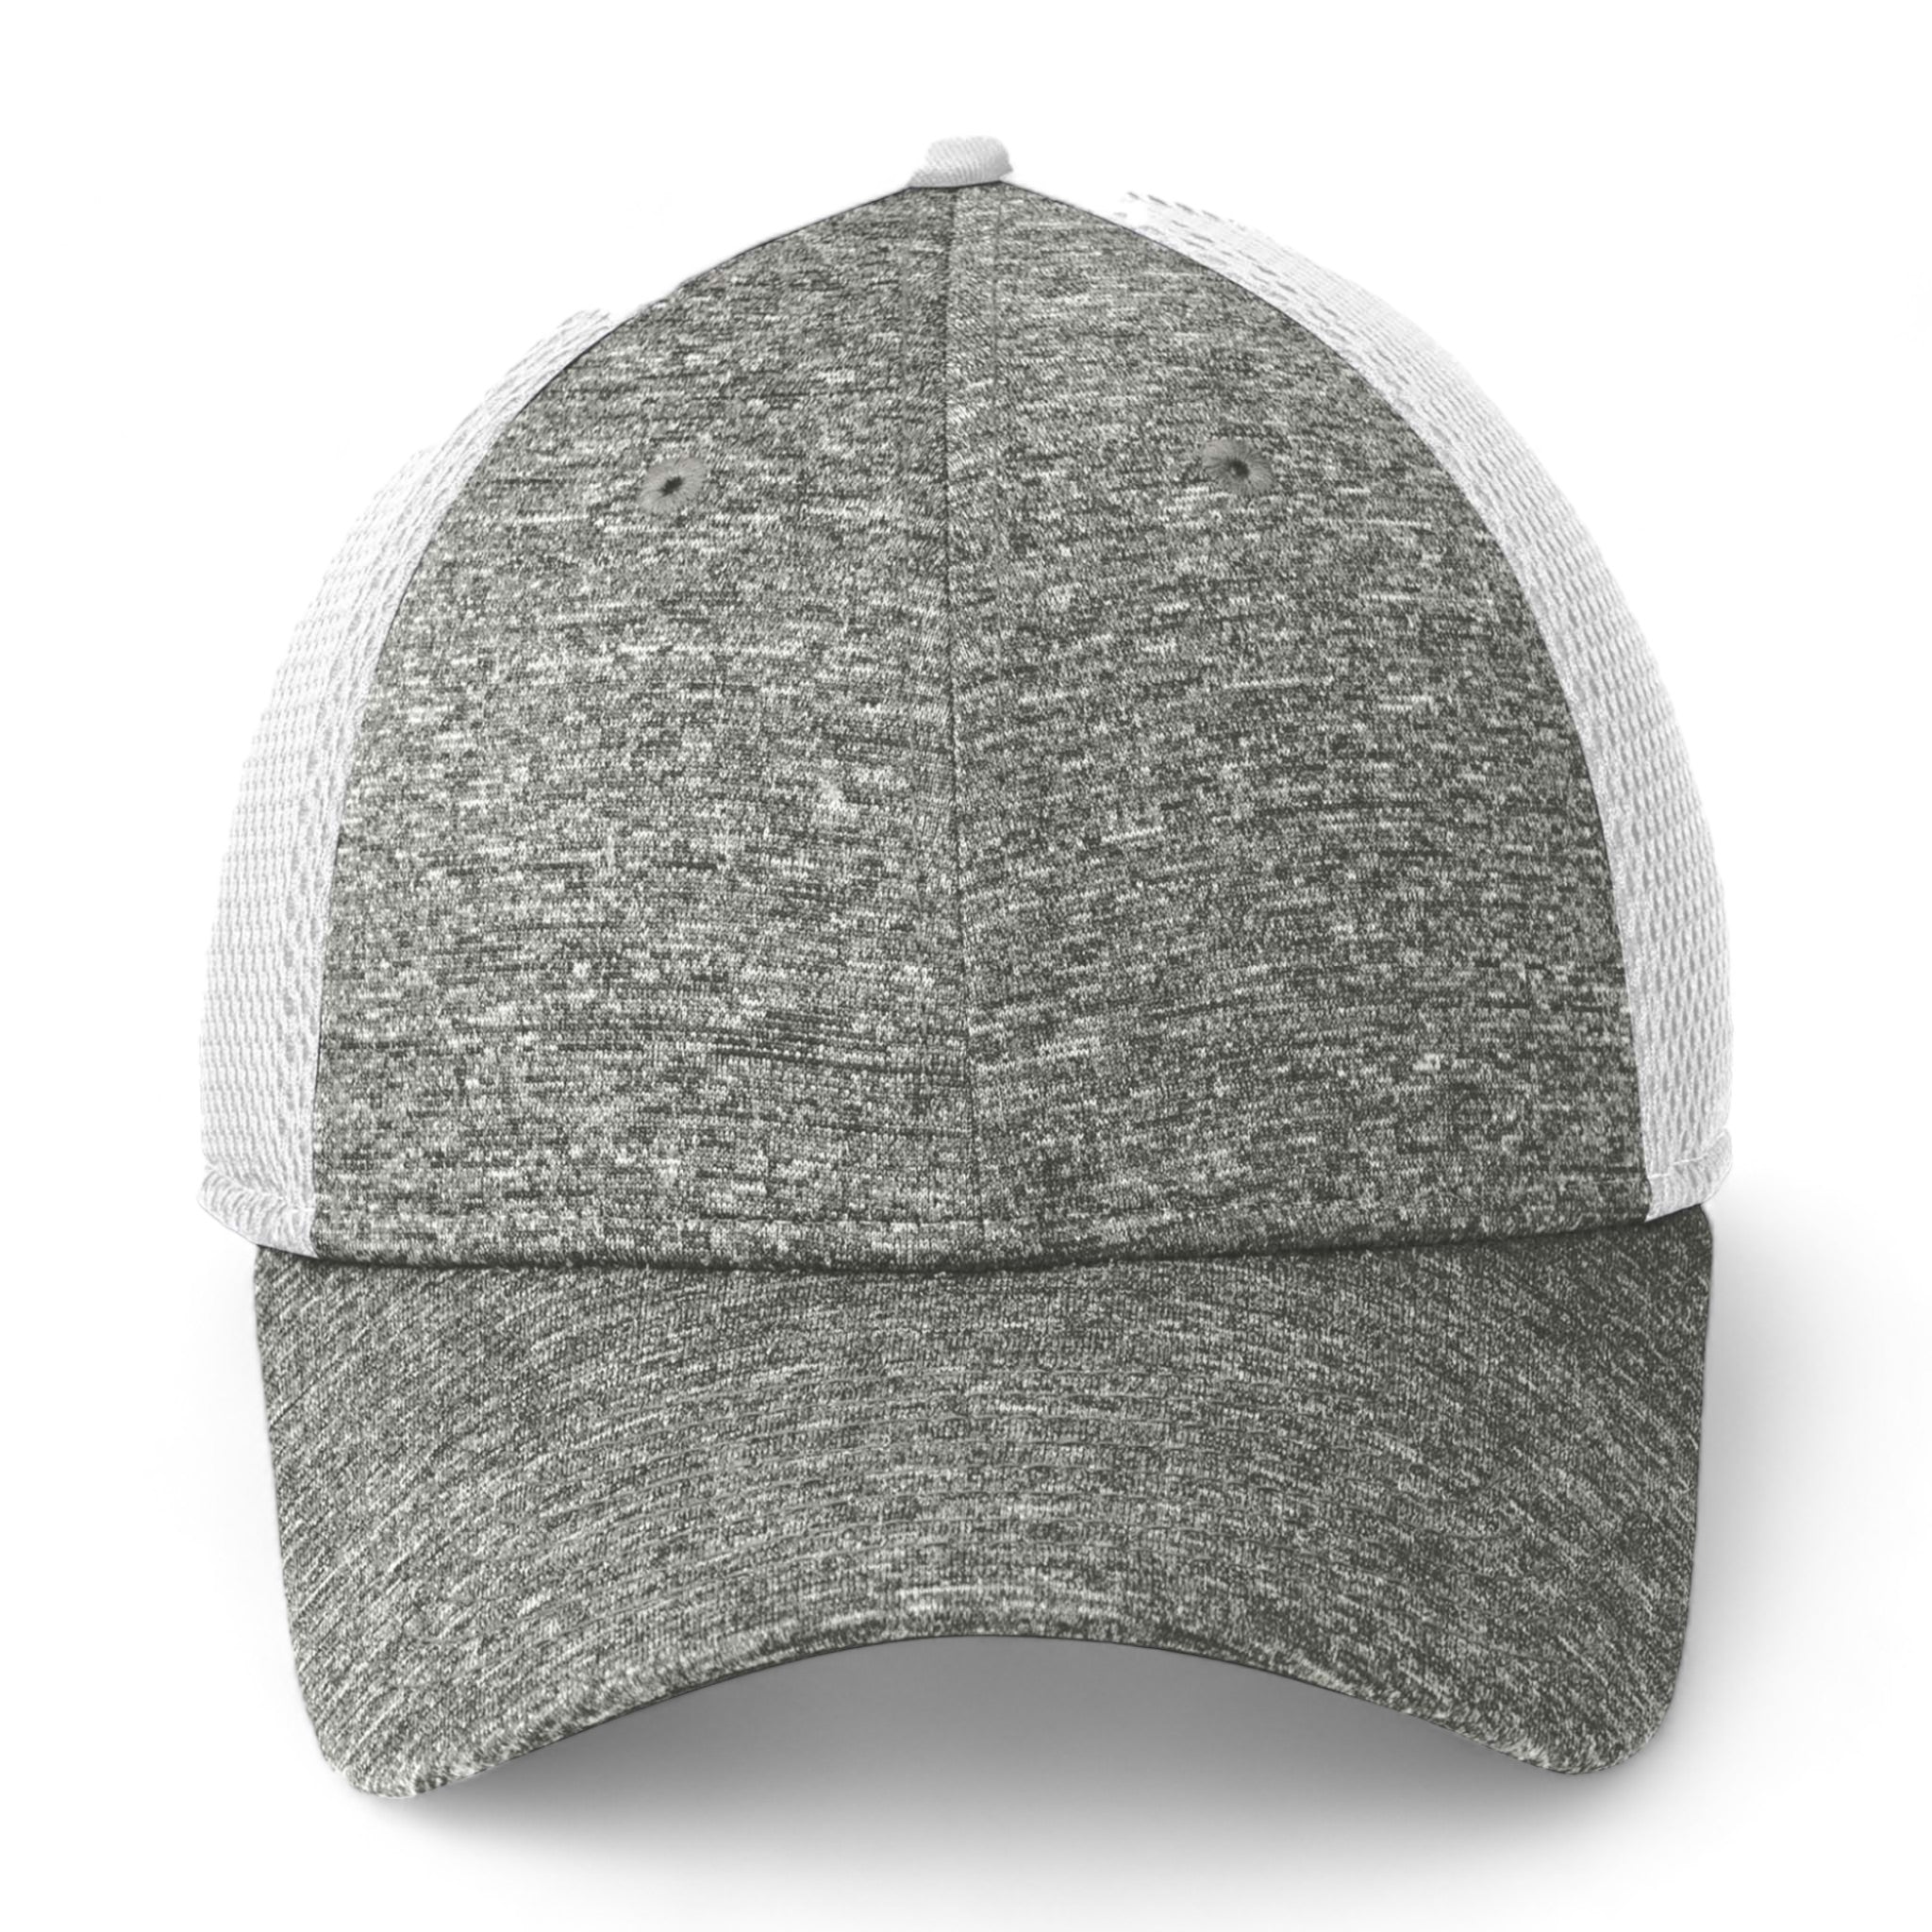 Front view of New Era NE702 custom hat in white and shadow heather